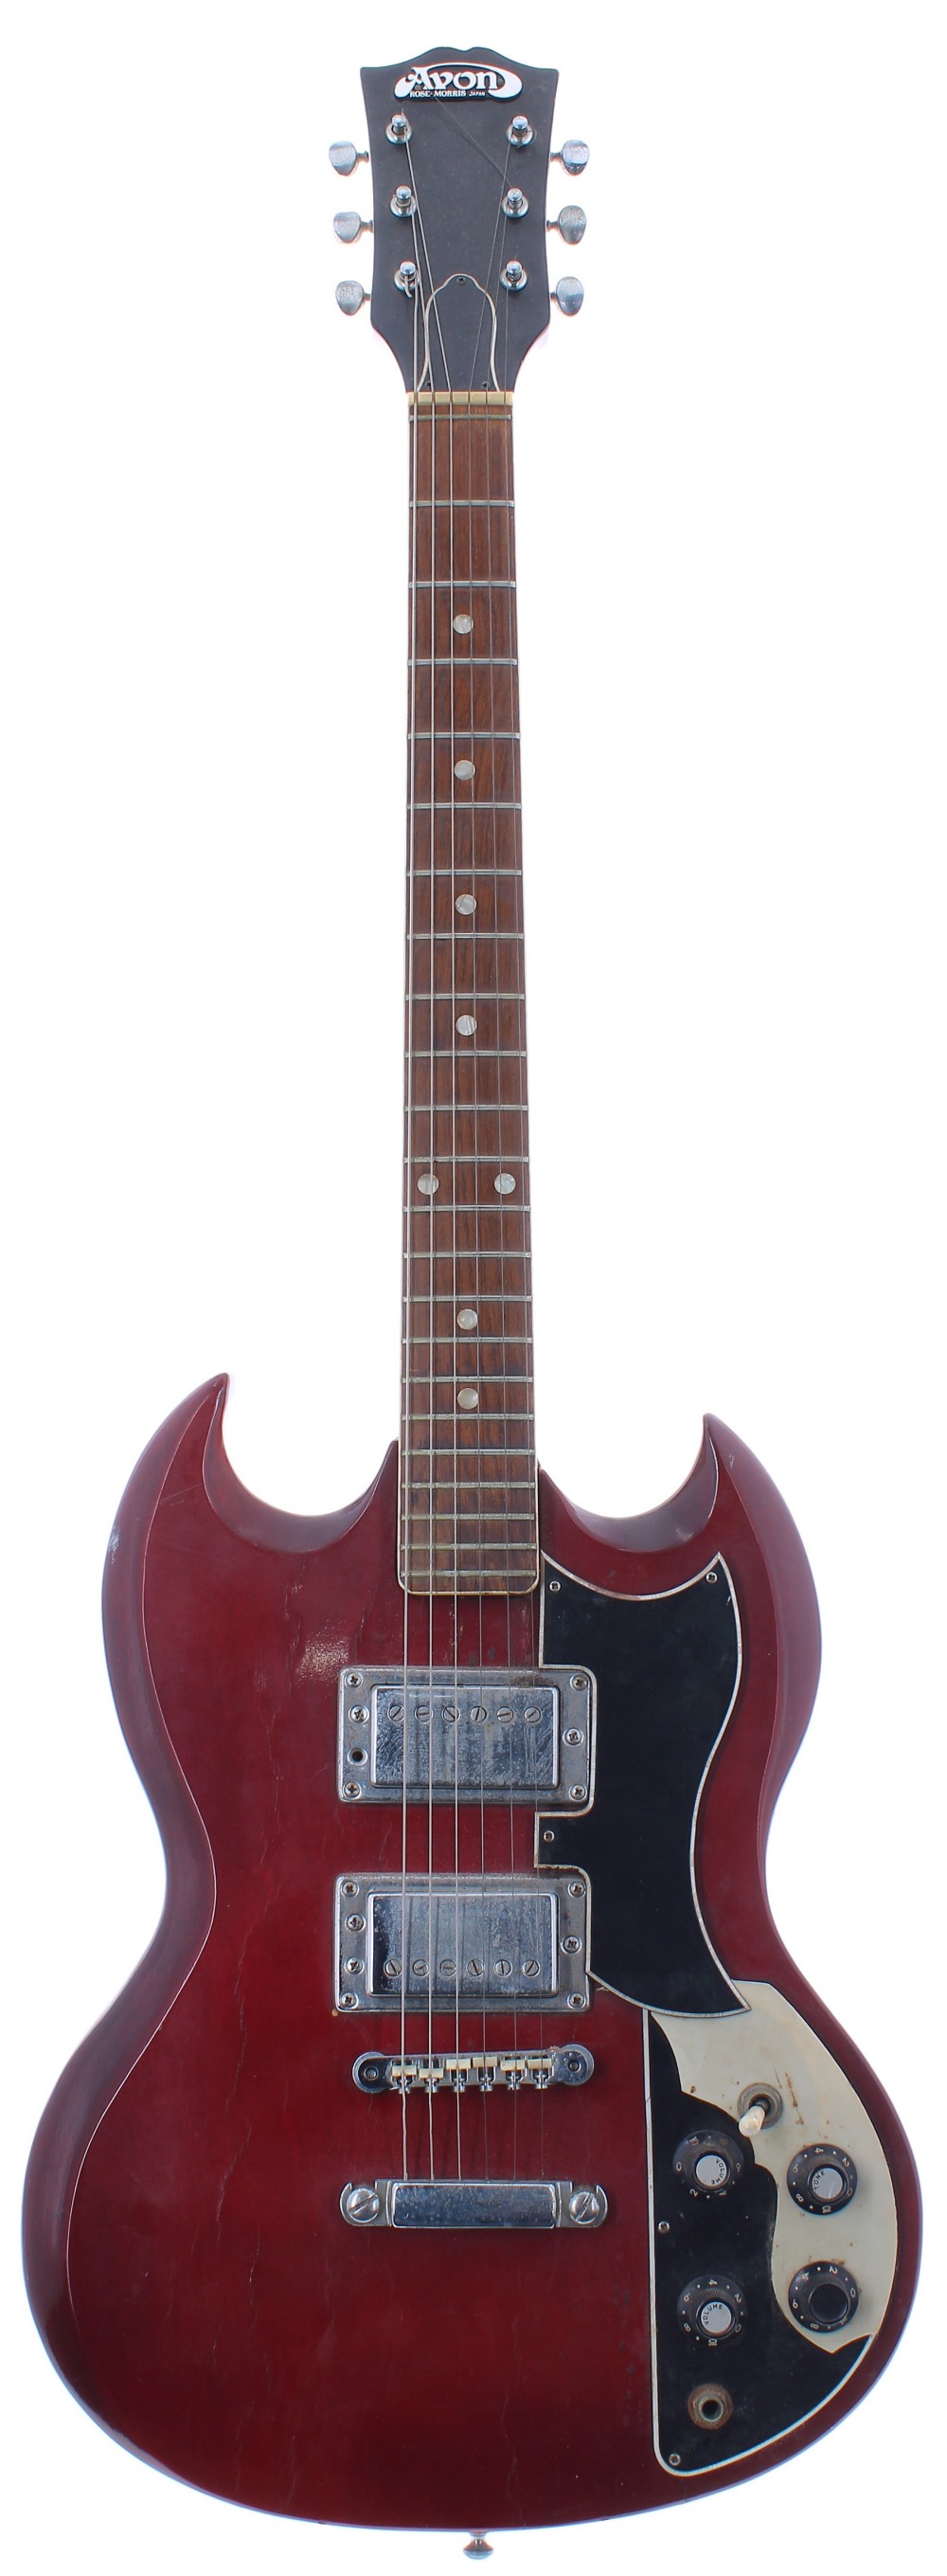 1970s Avon by Rose Morris SG electric guitar, made in Japan; Finish: cherry, lacquer cracking,